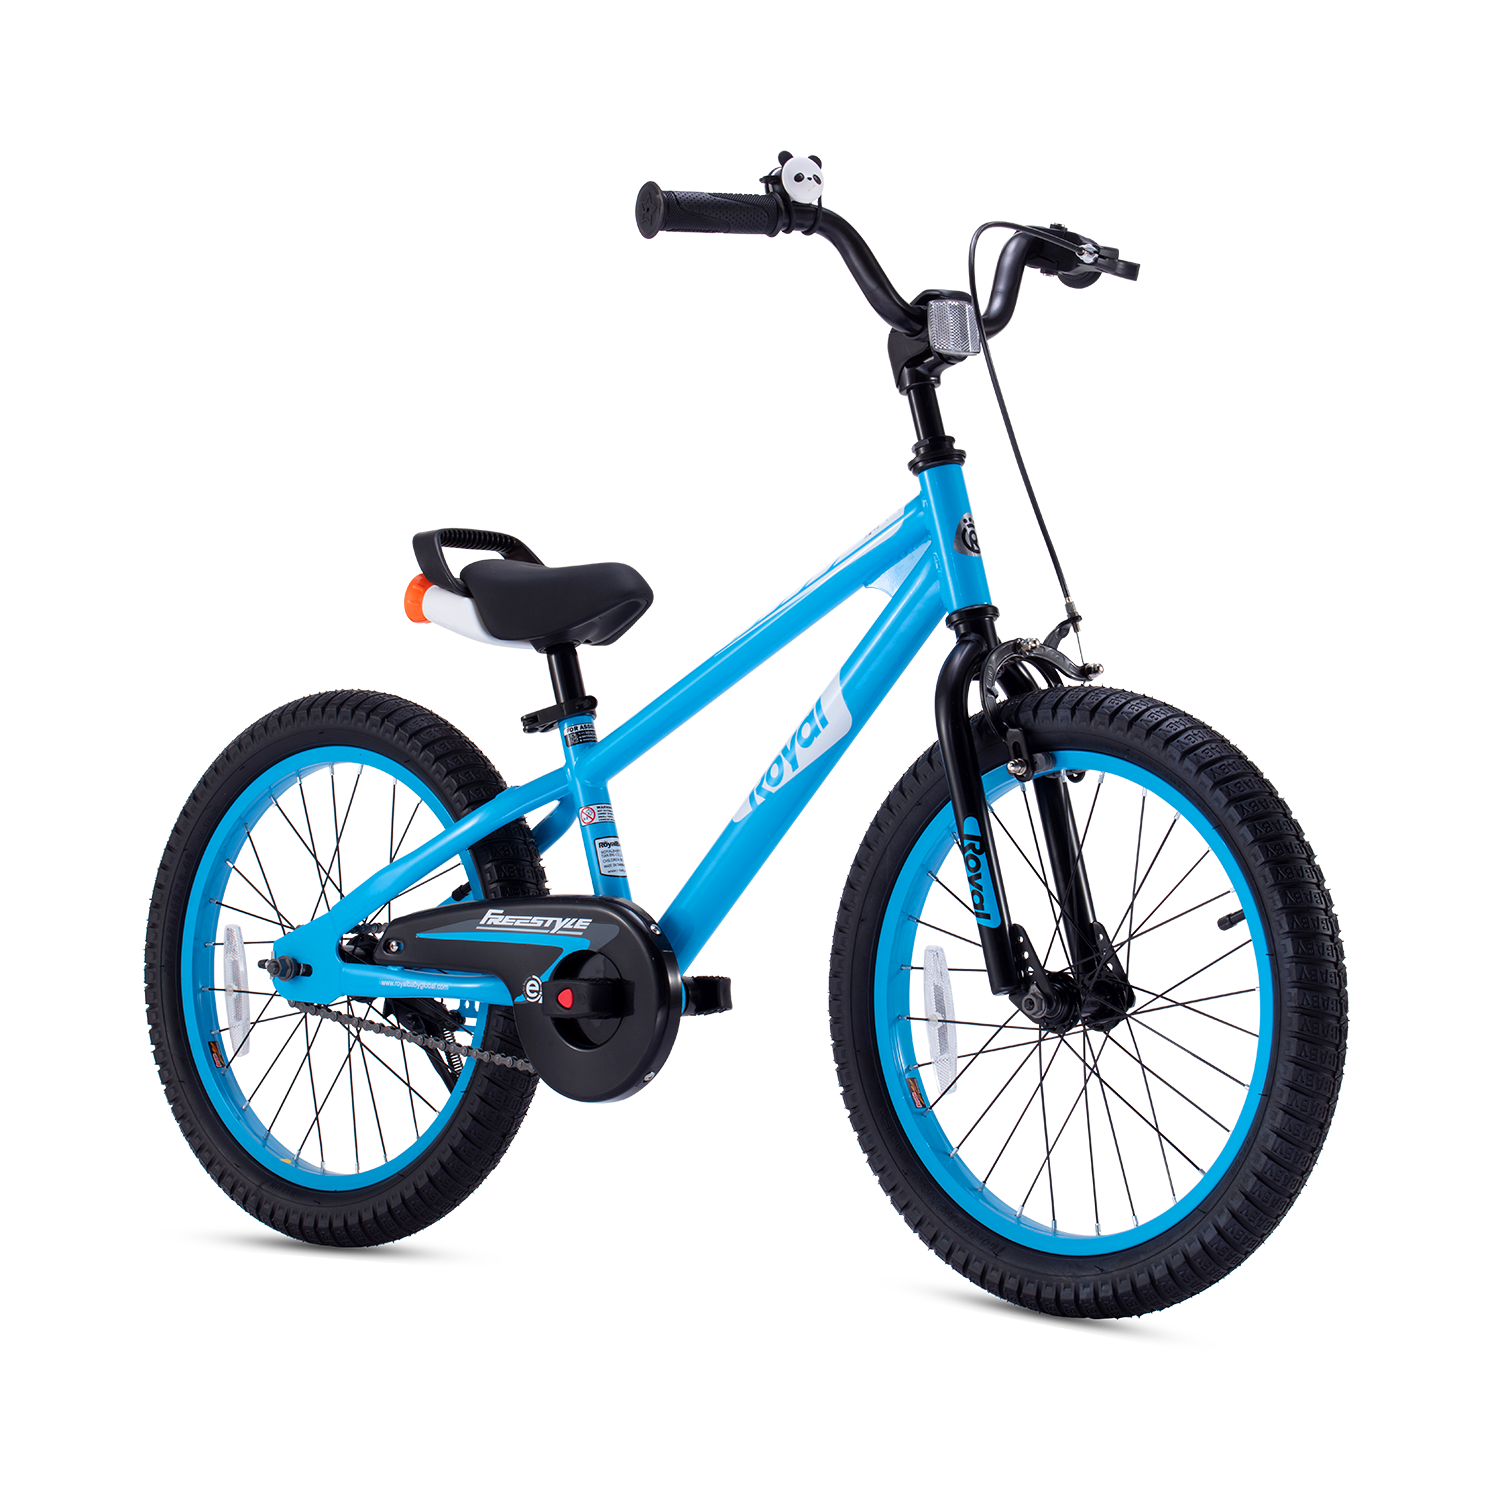 RoyalBaby EZ Kids Bike Easy Learn Balancing to Biking 12 Inch Balance & Pedal Bicycle Instant Assembly for Boys Girls Ages 2-4 Years Blue